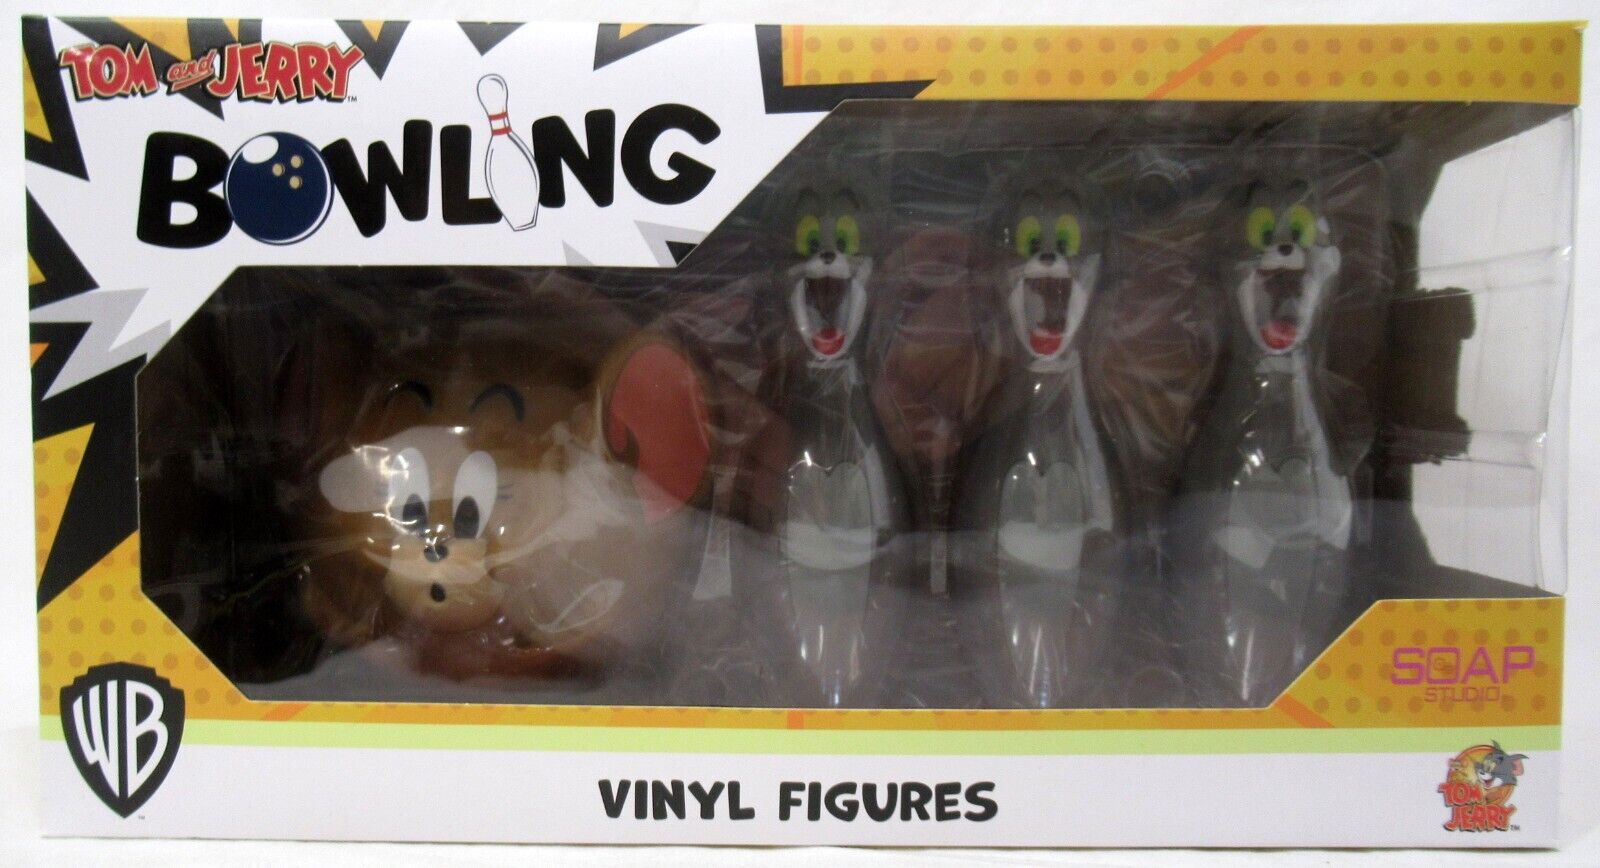 Soap Studio WB Tom and Jerry Bowling Vinyl Figure Set New Sealed